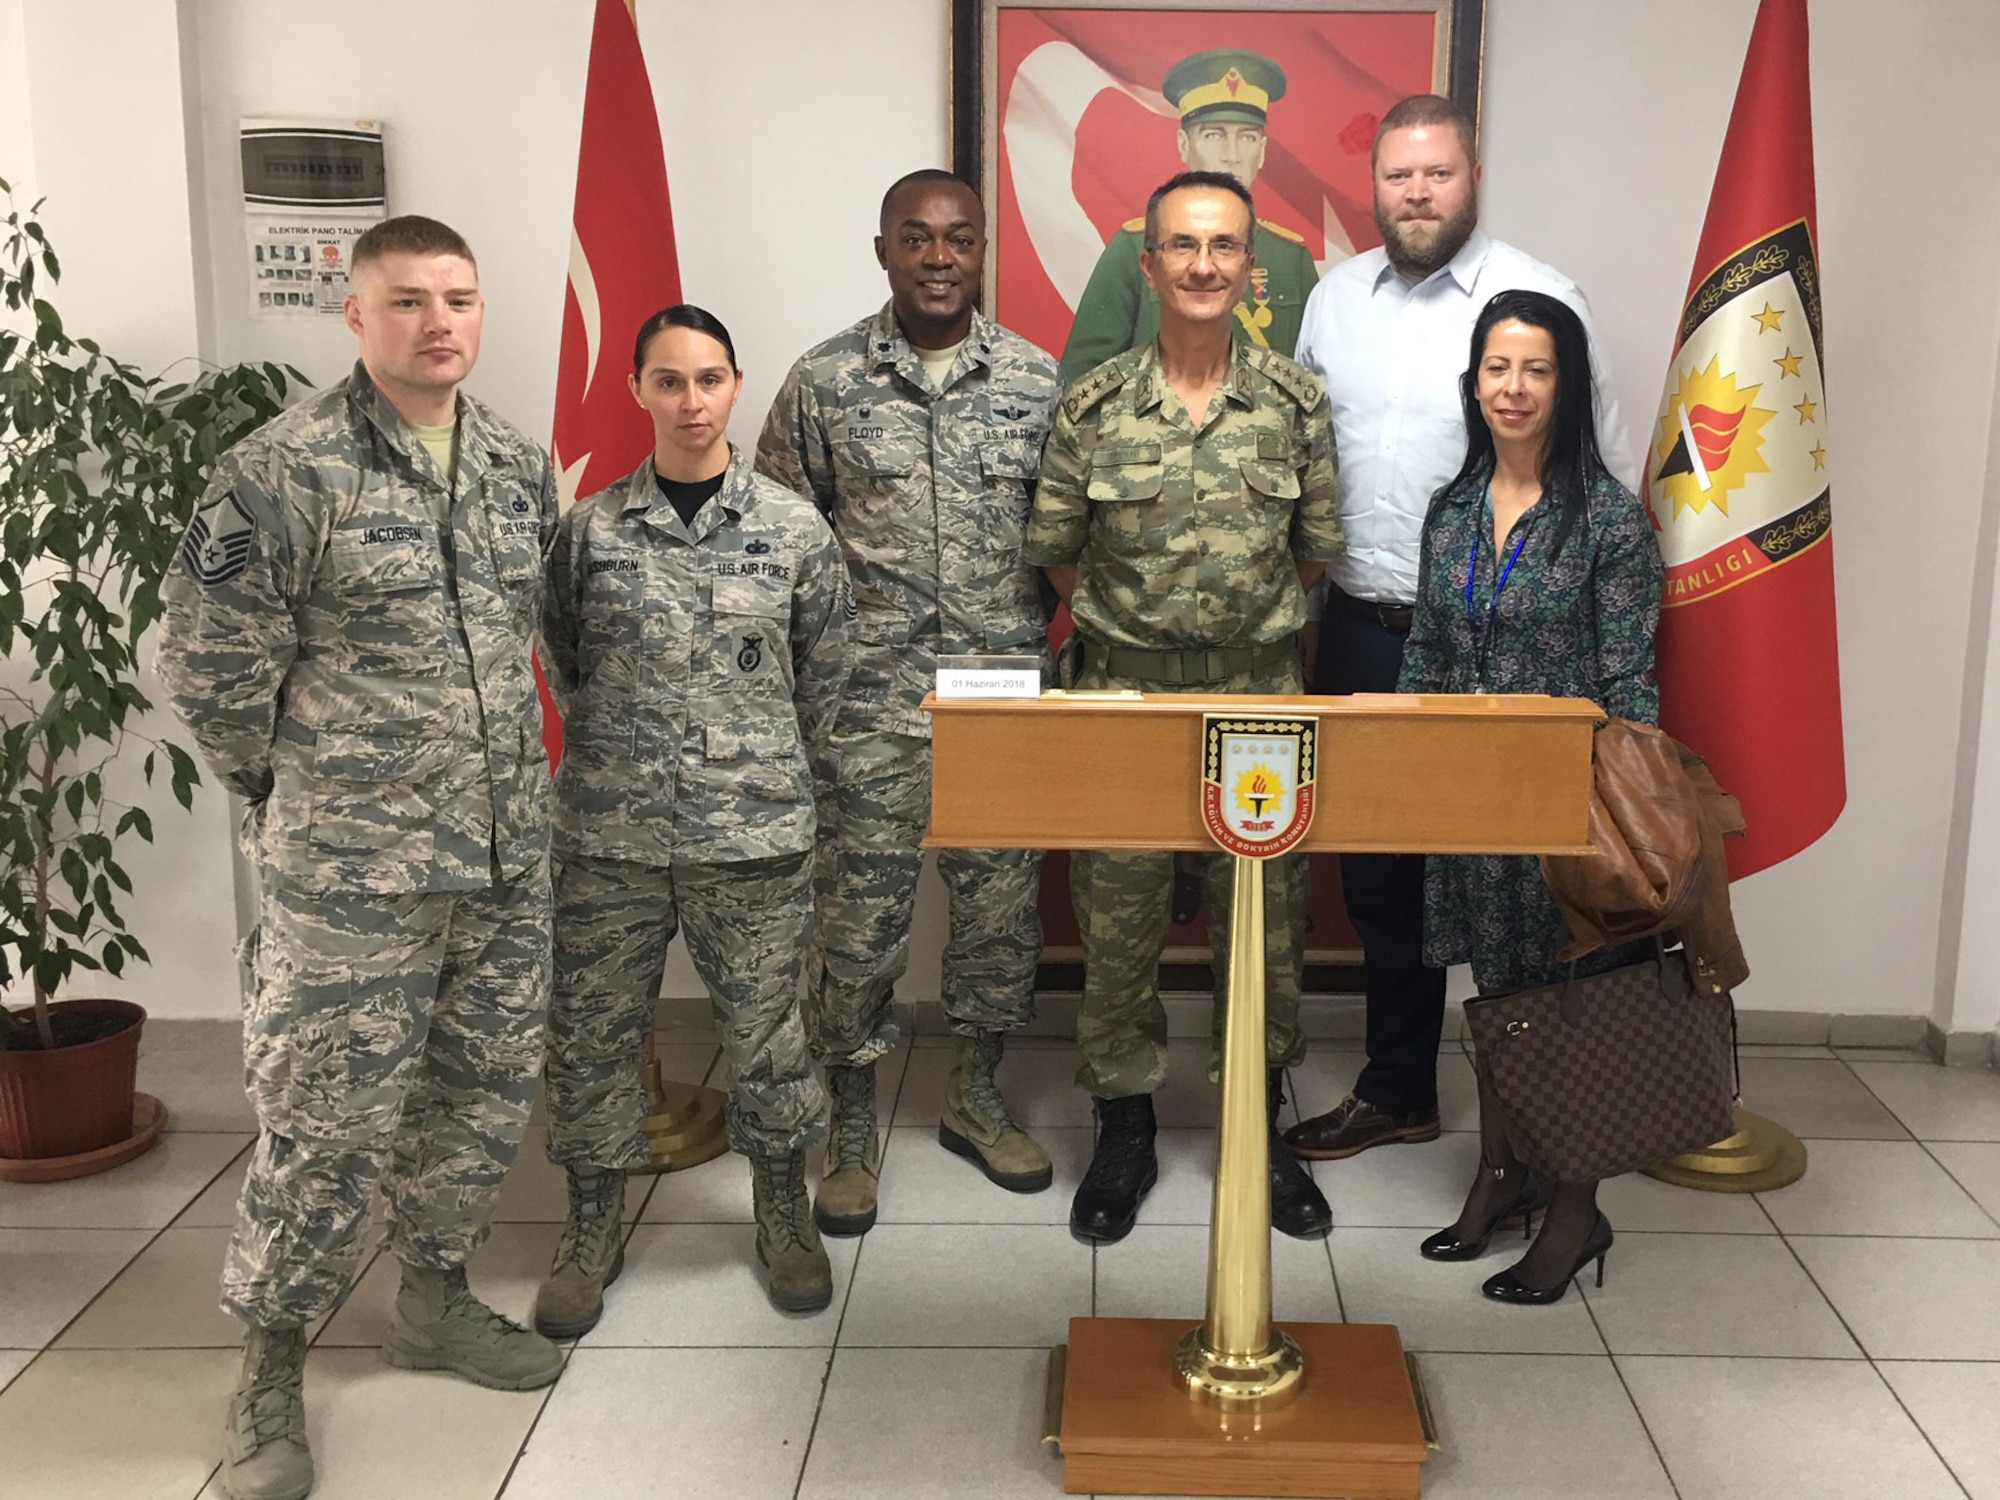 U.S. Air Force members of the 717th Air Base Squadron pose for a photo with the Turkish Education and Doctrine Base Mission Support Group commander after a joint security exercise at Ankara, Turkey, June 1, 2018.